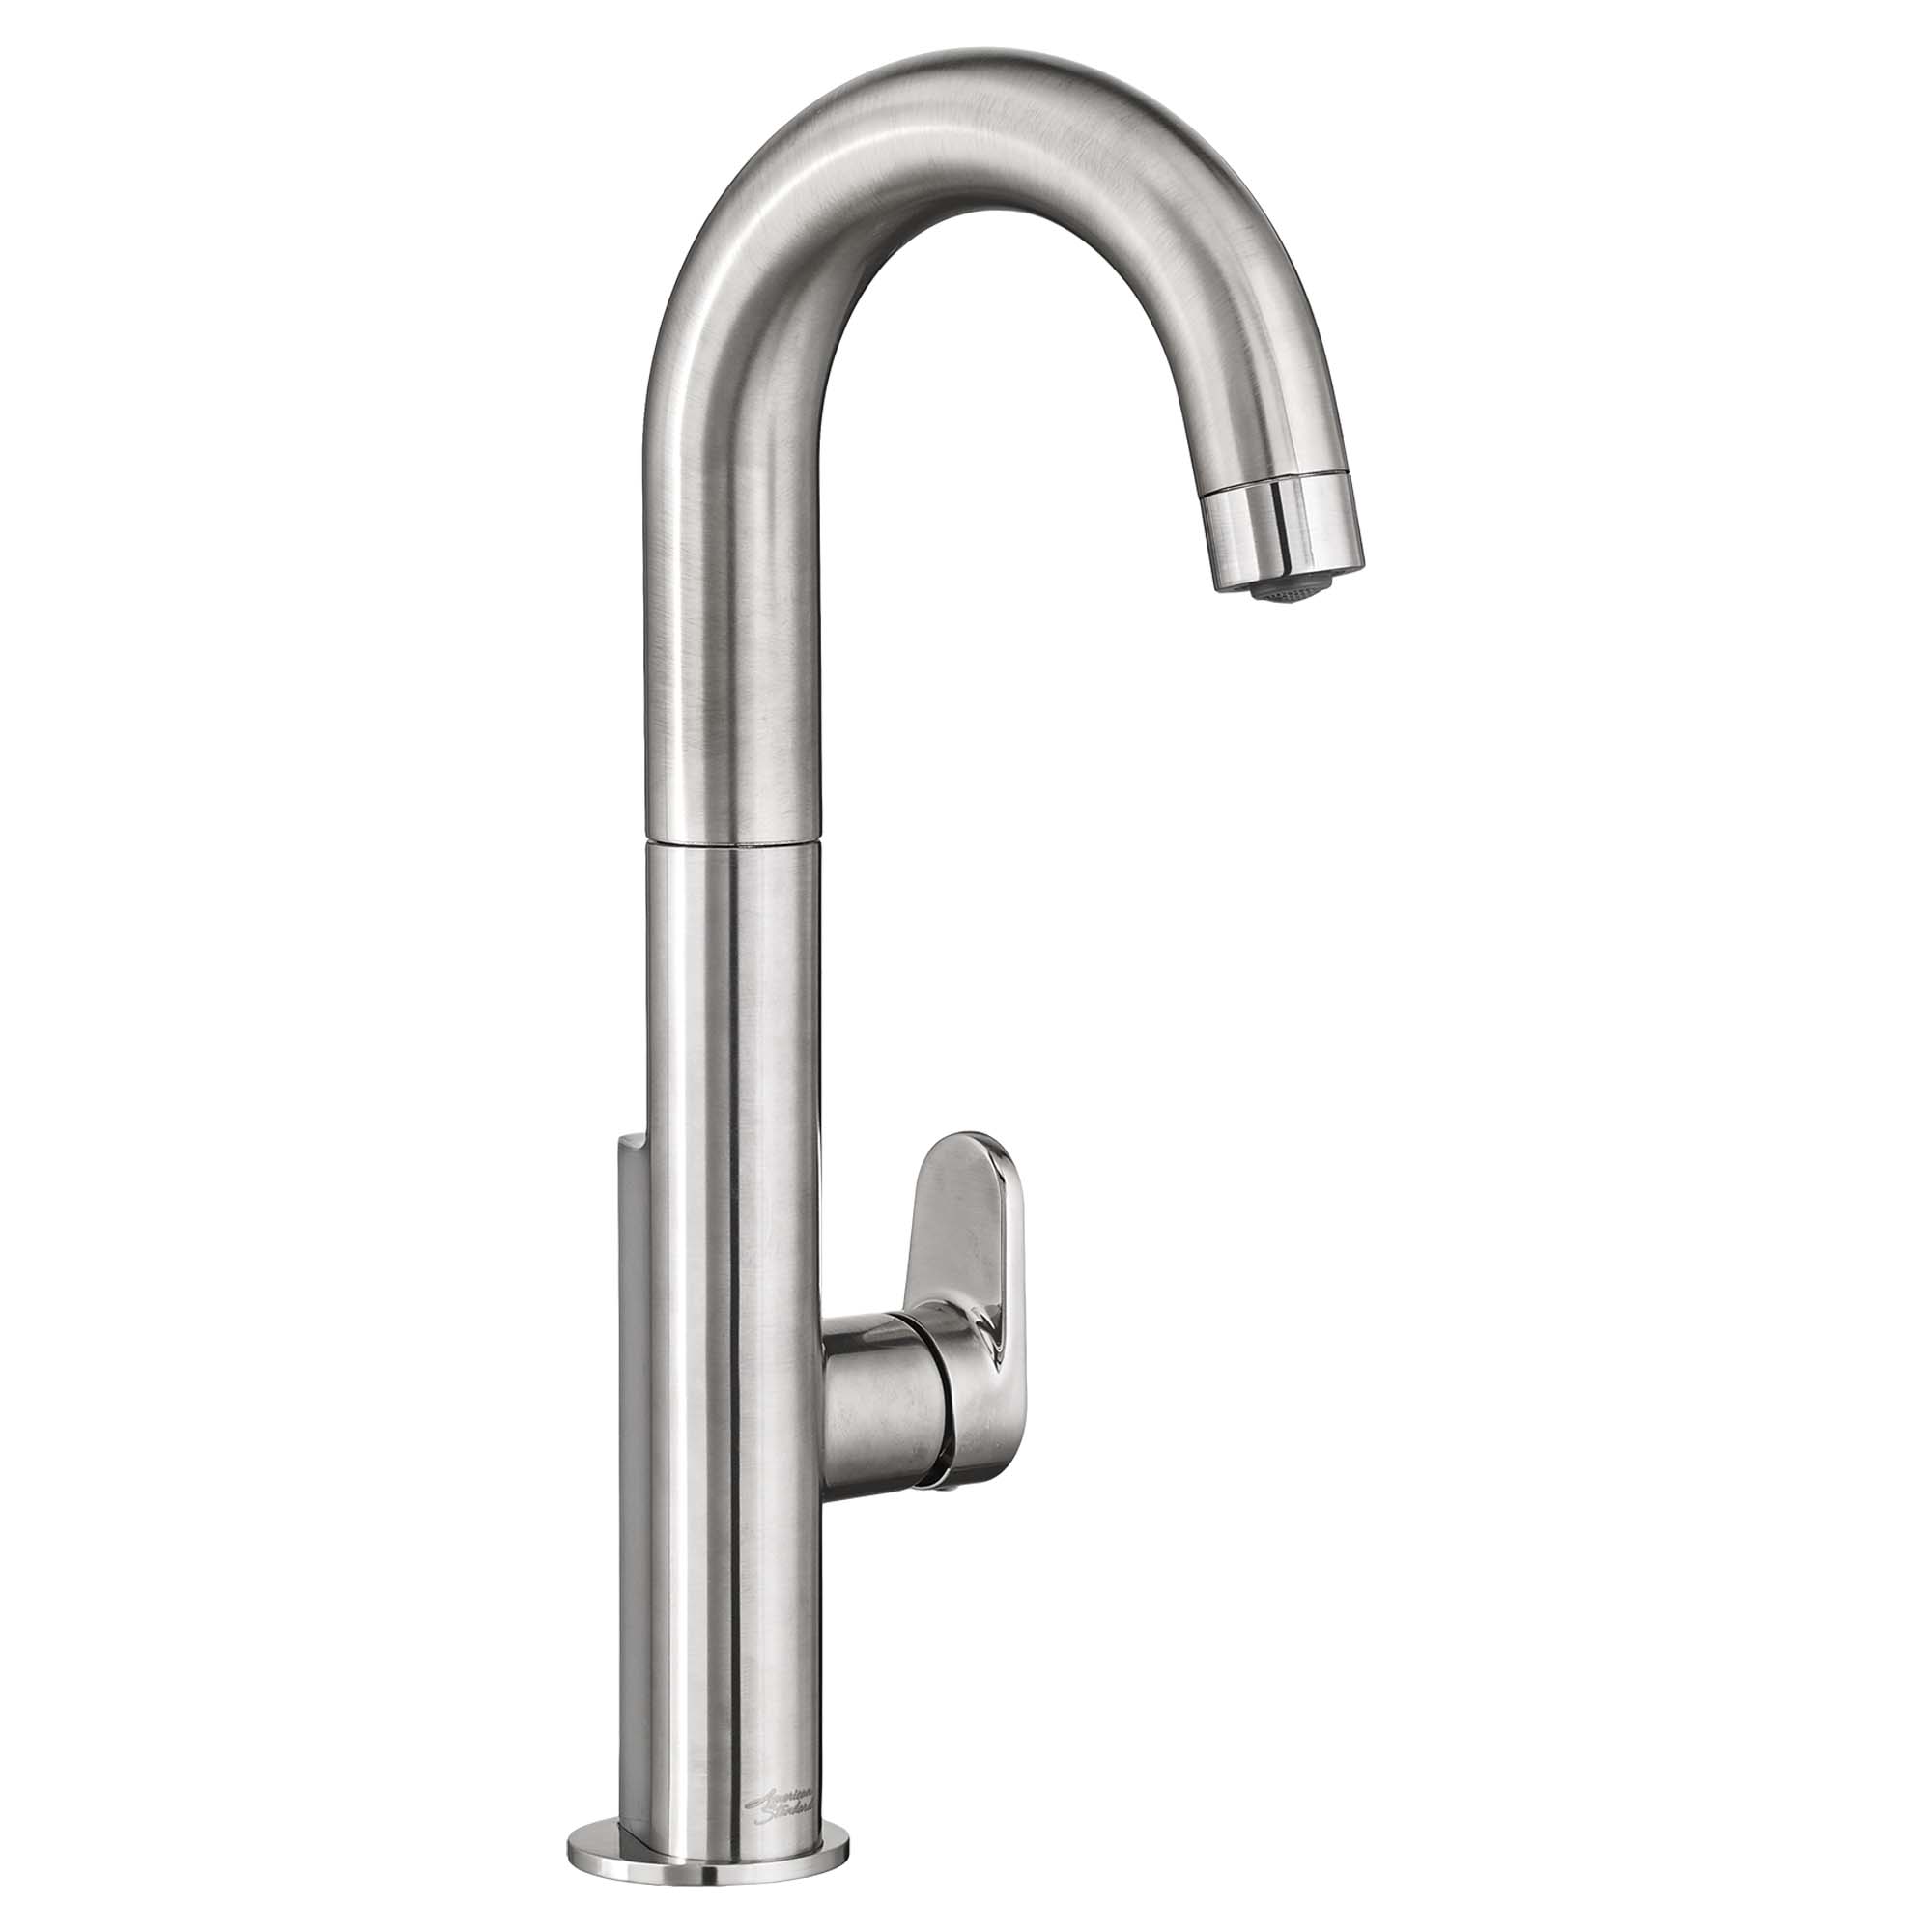 Beale® Single-Handle Pull-Down Single Spray Bar Faucet 1.5 gpm/5.7 L/min